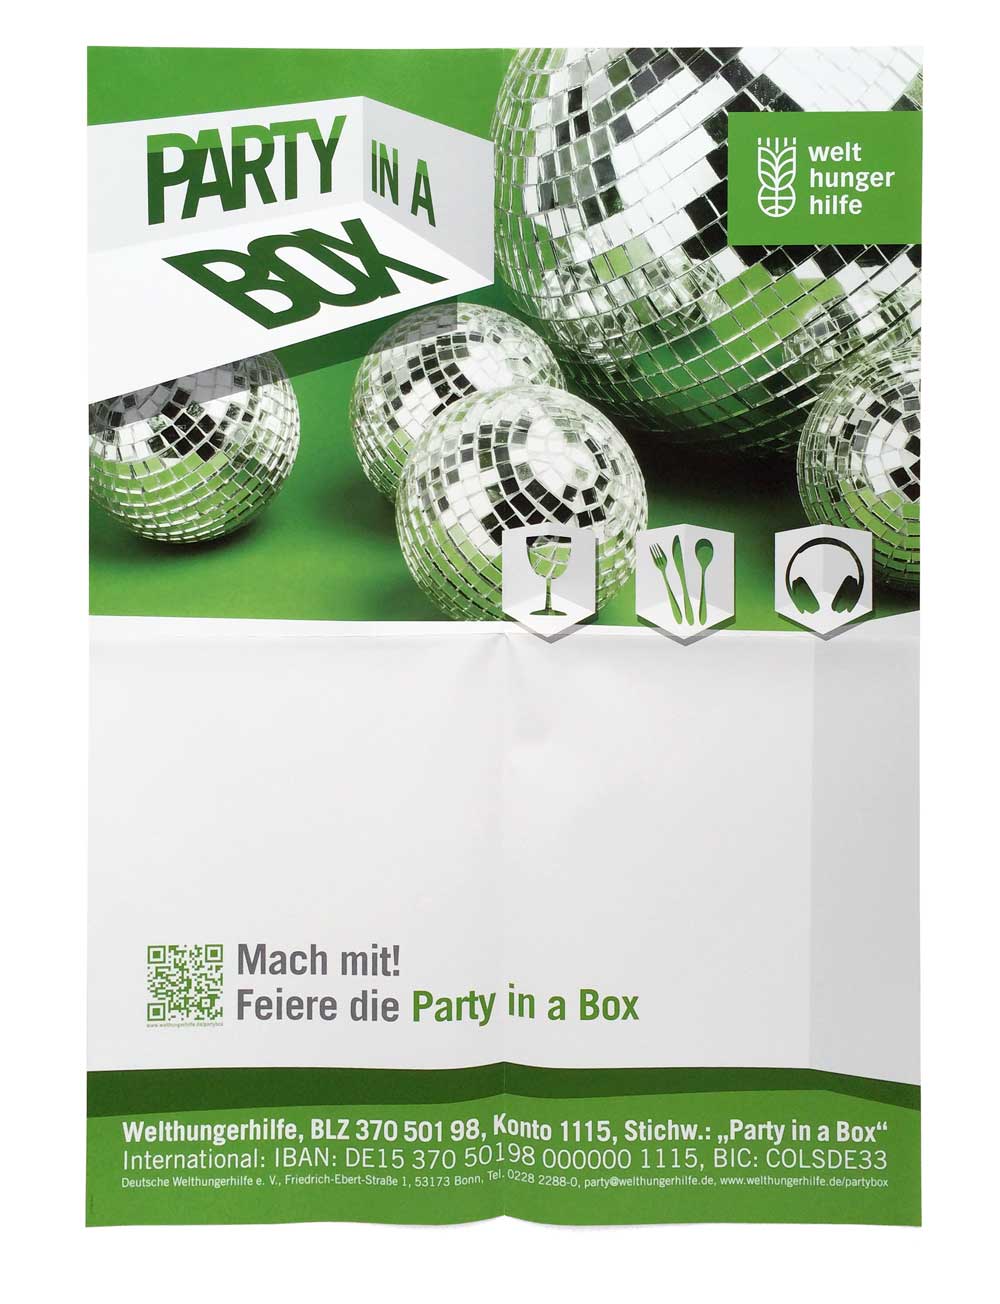 Welthungerhilfe – Party in a Box